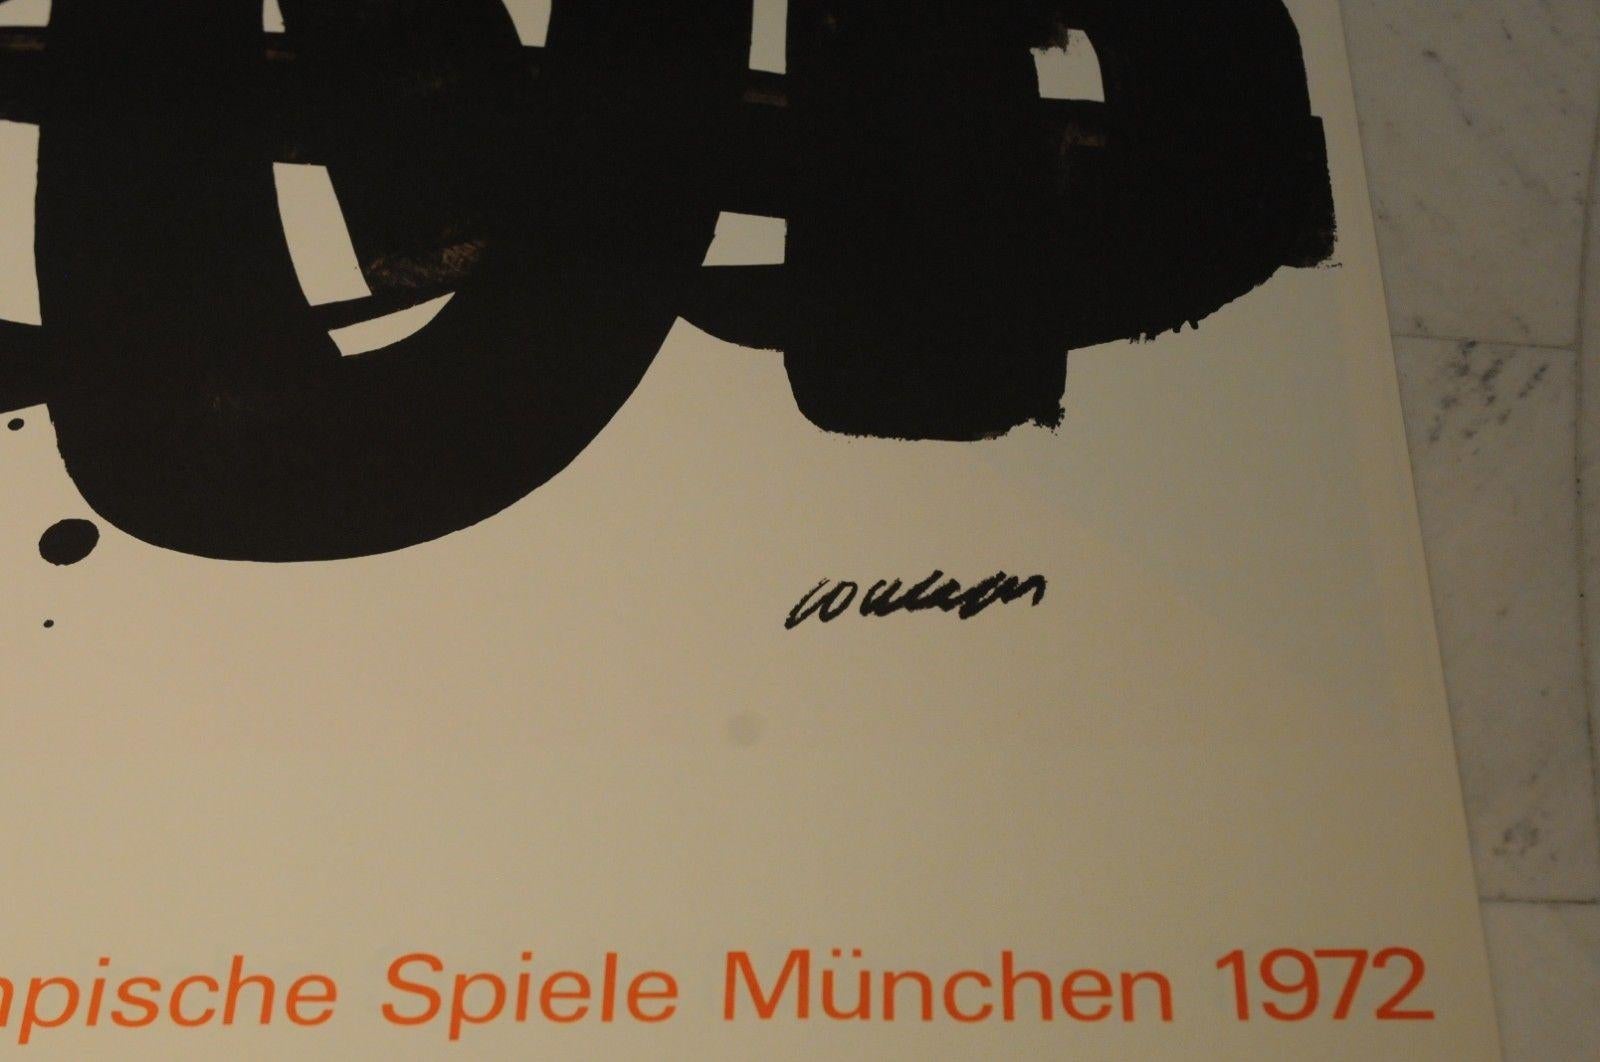 
1972 Munich Olympic Games - Pierre Soulages 
Poster Country: Germany. 
Year: 1970. 
Artist: Pierre Soulage. Edition Olympia 1972.

On heavy paper 102 x 64 cm (c. 40 x 26 inch)
Made for the Olympic Games in Munich, 1972

In good condition!
One of 20